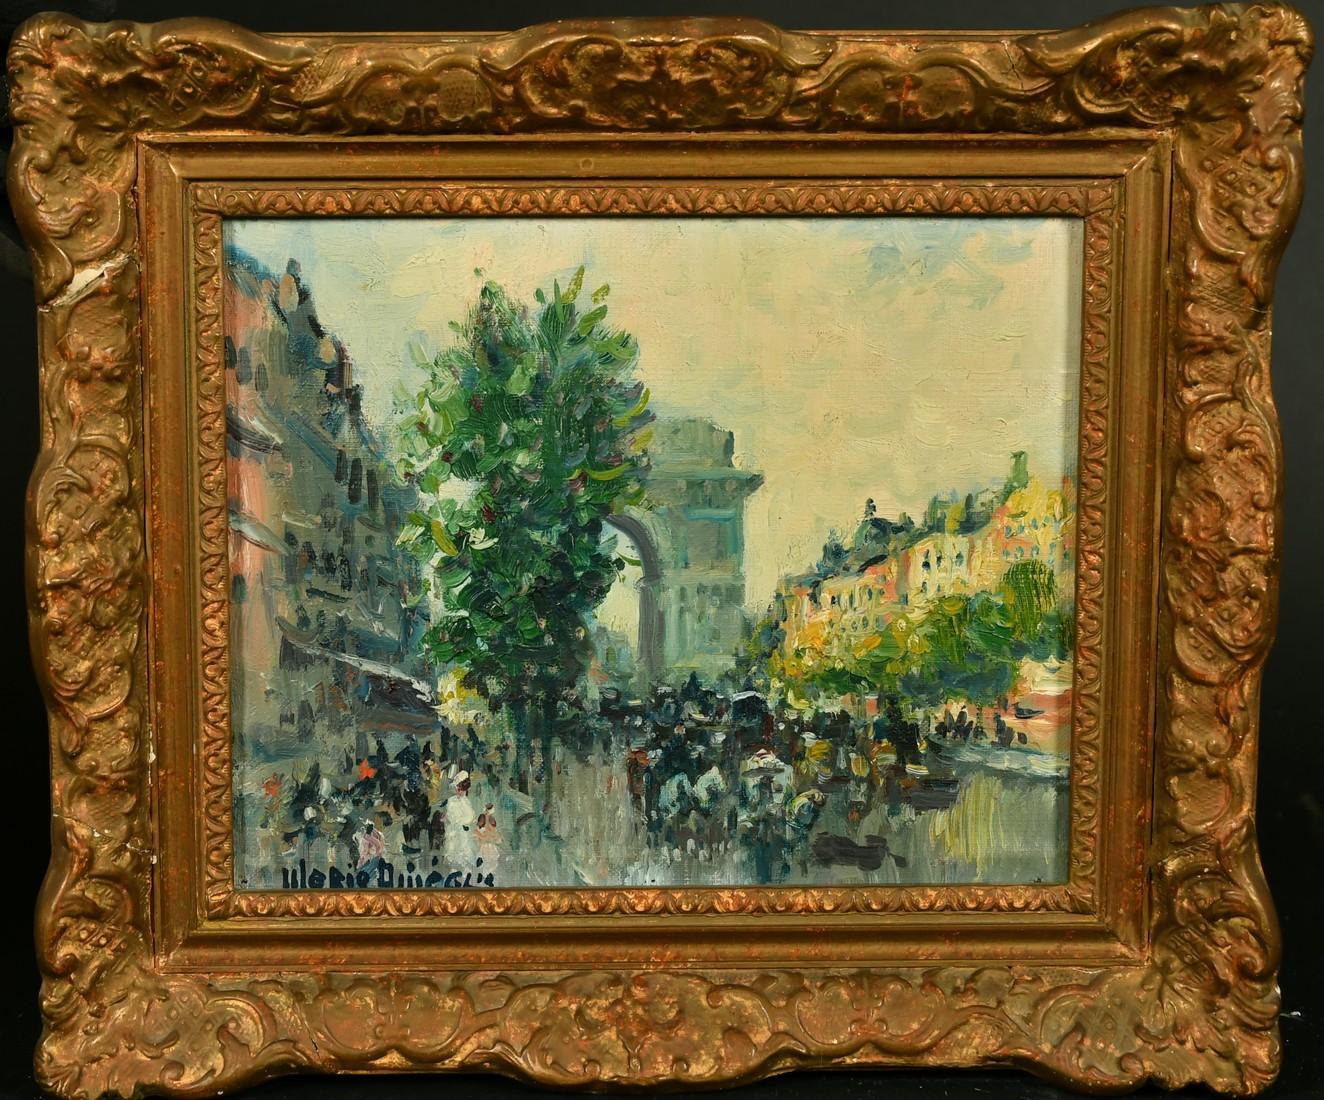 Merio Ameglio Figurative Painting - Champs Elysee Paris, Busy Impressionist Oil Painting